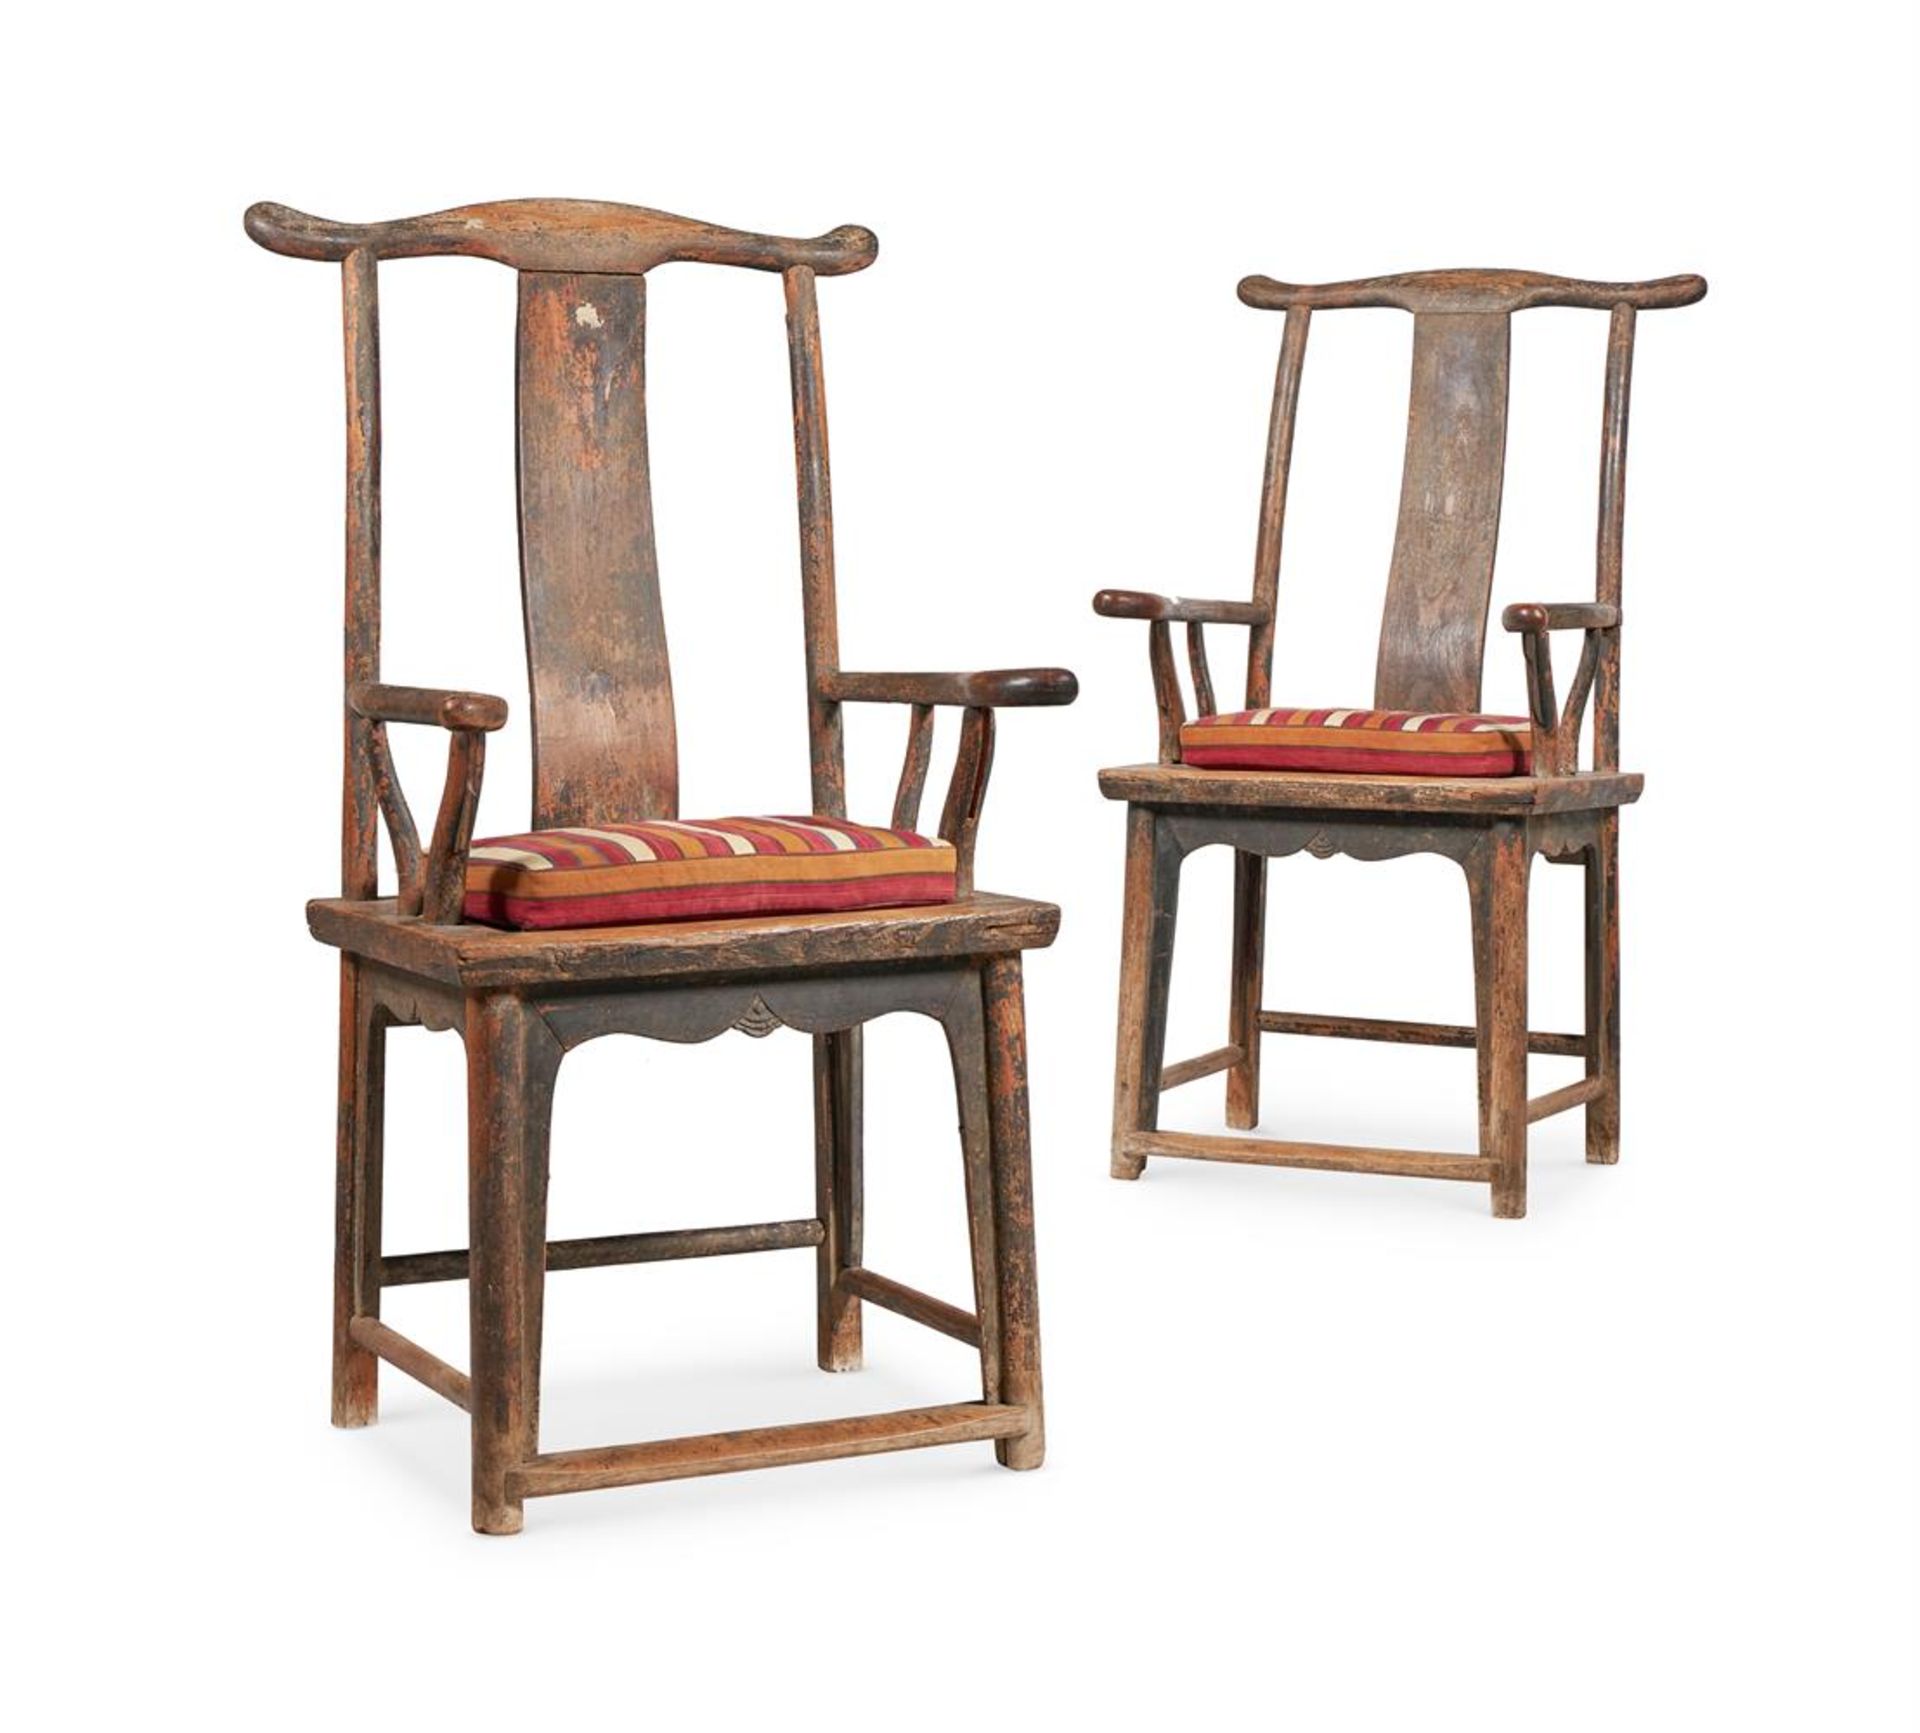 A PAIR OF CHINESE PAINTED ELM ARMCHAIRS, 18TH CENTURY